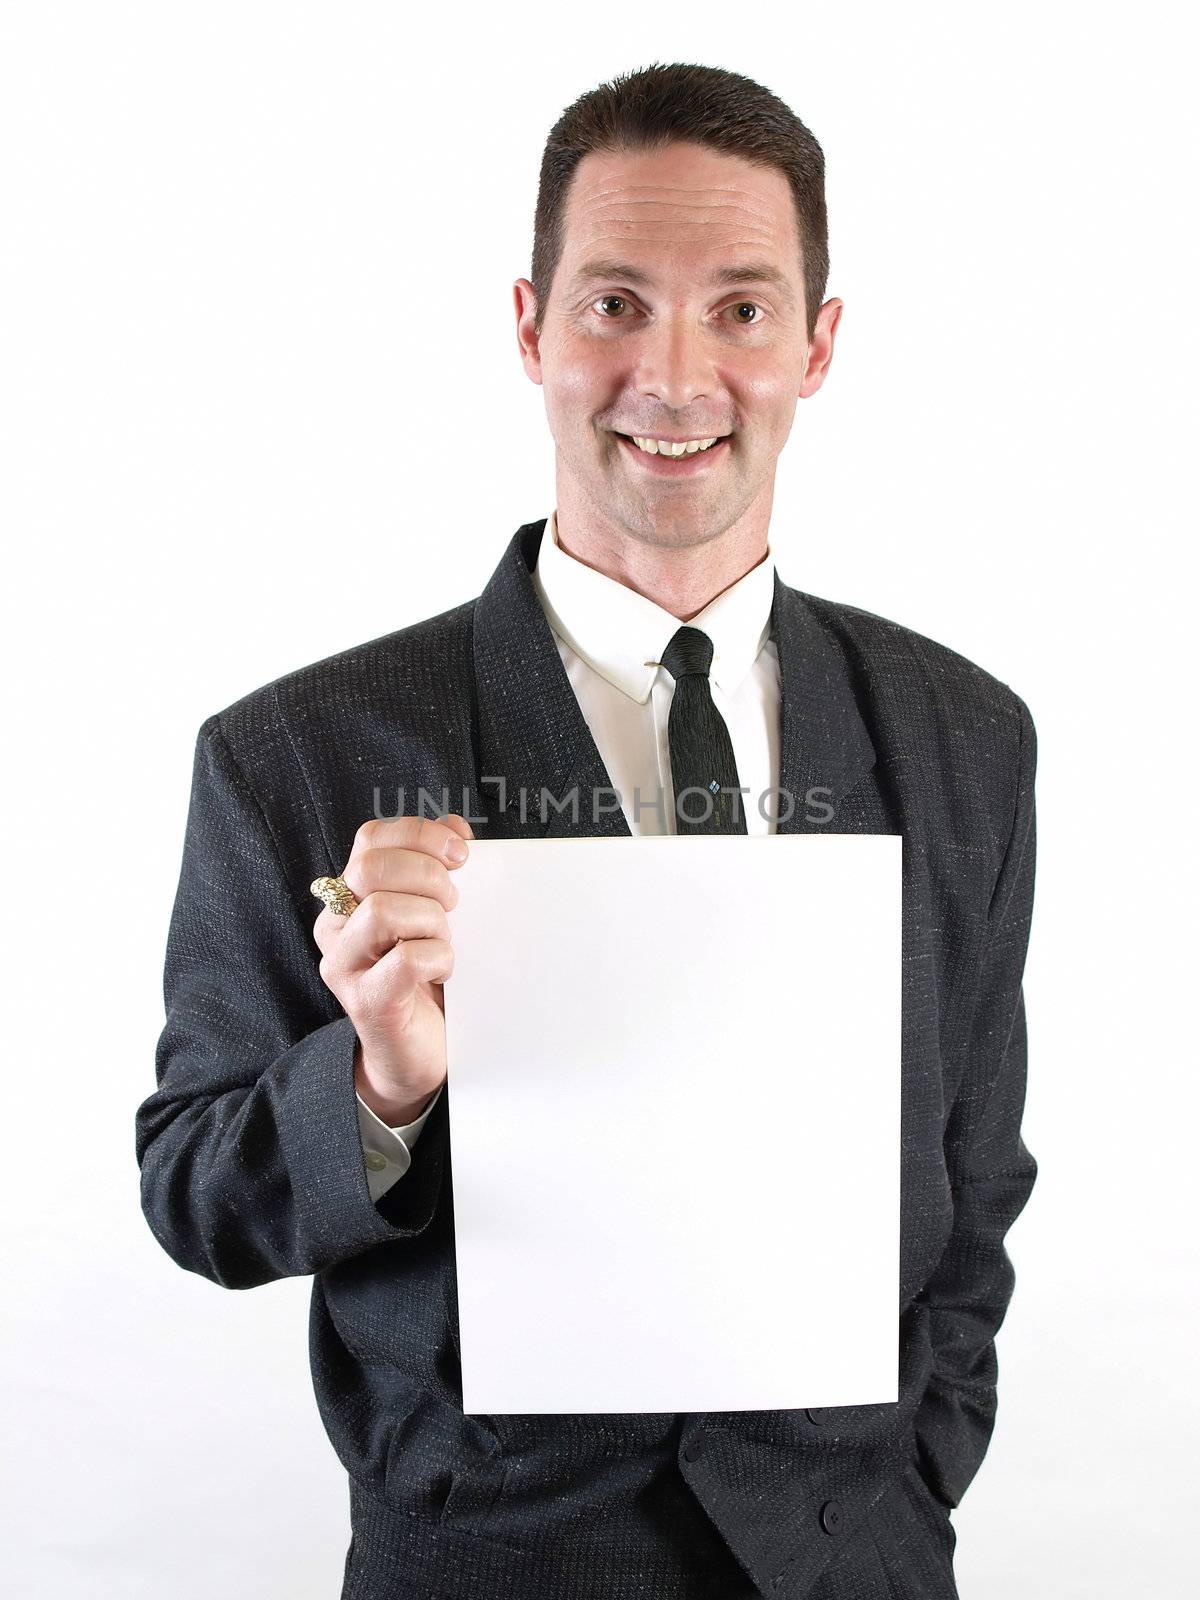 A man with a broad smile holds a blank white sign.